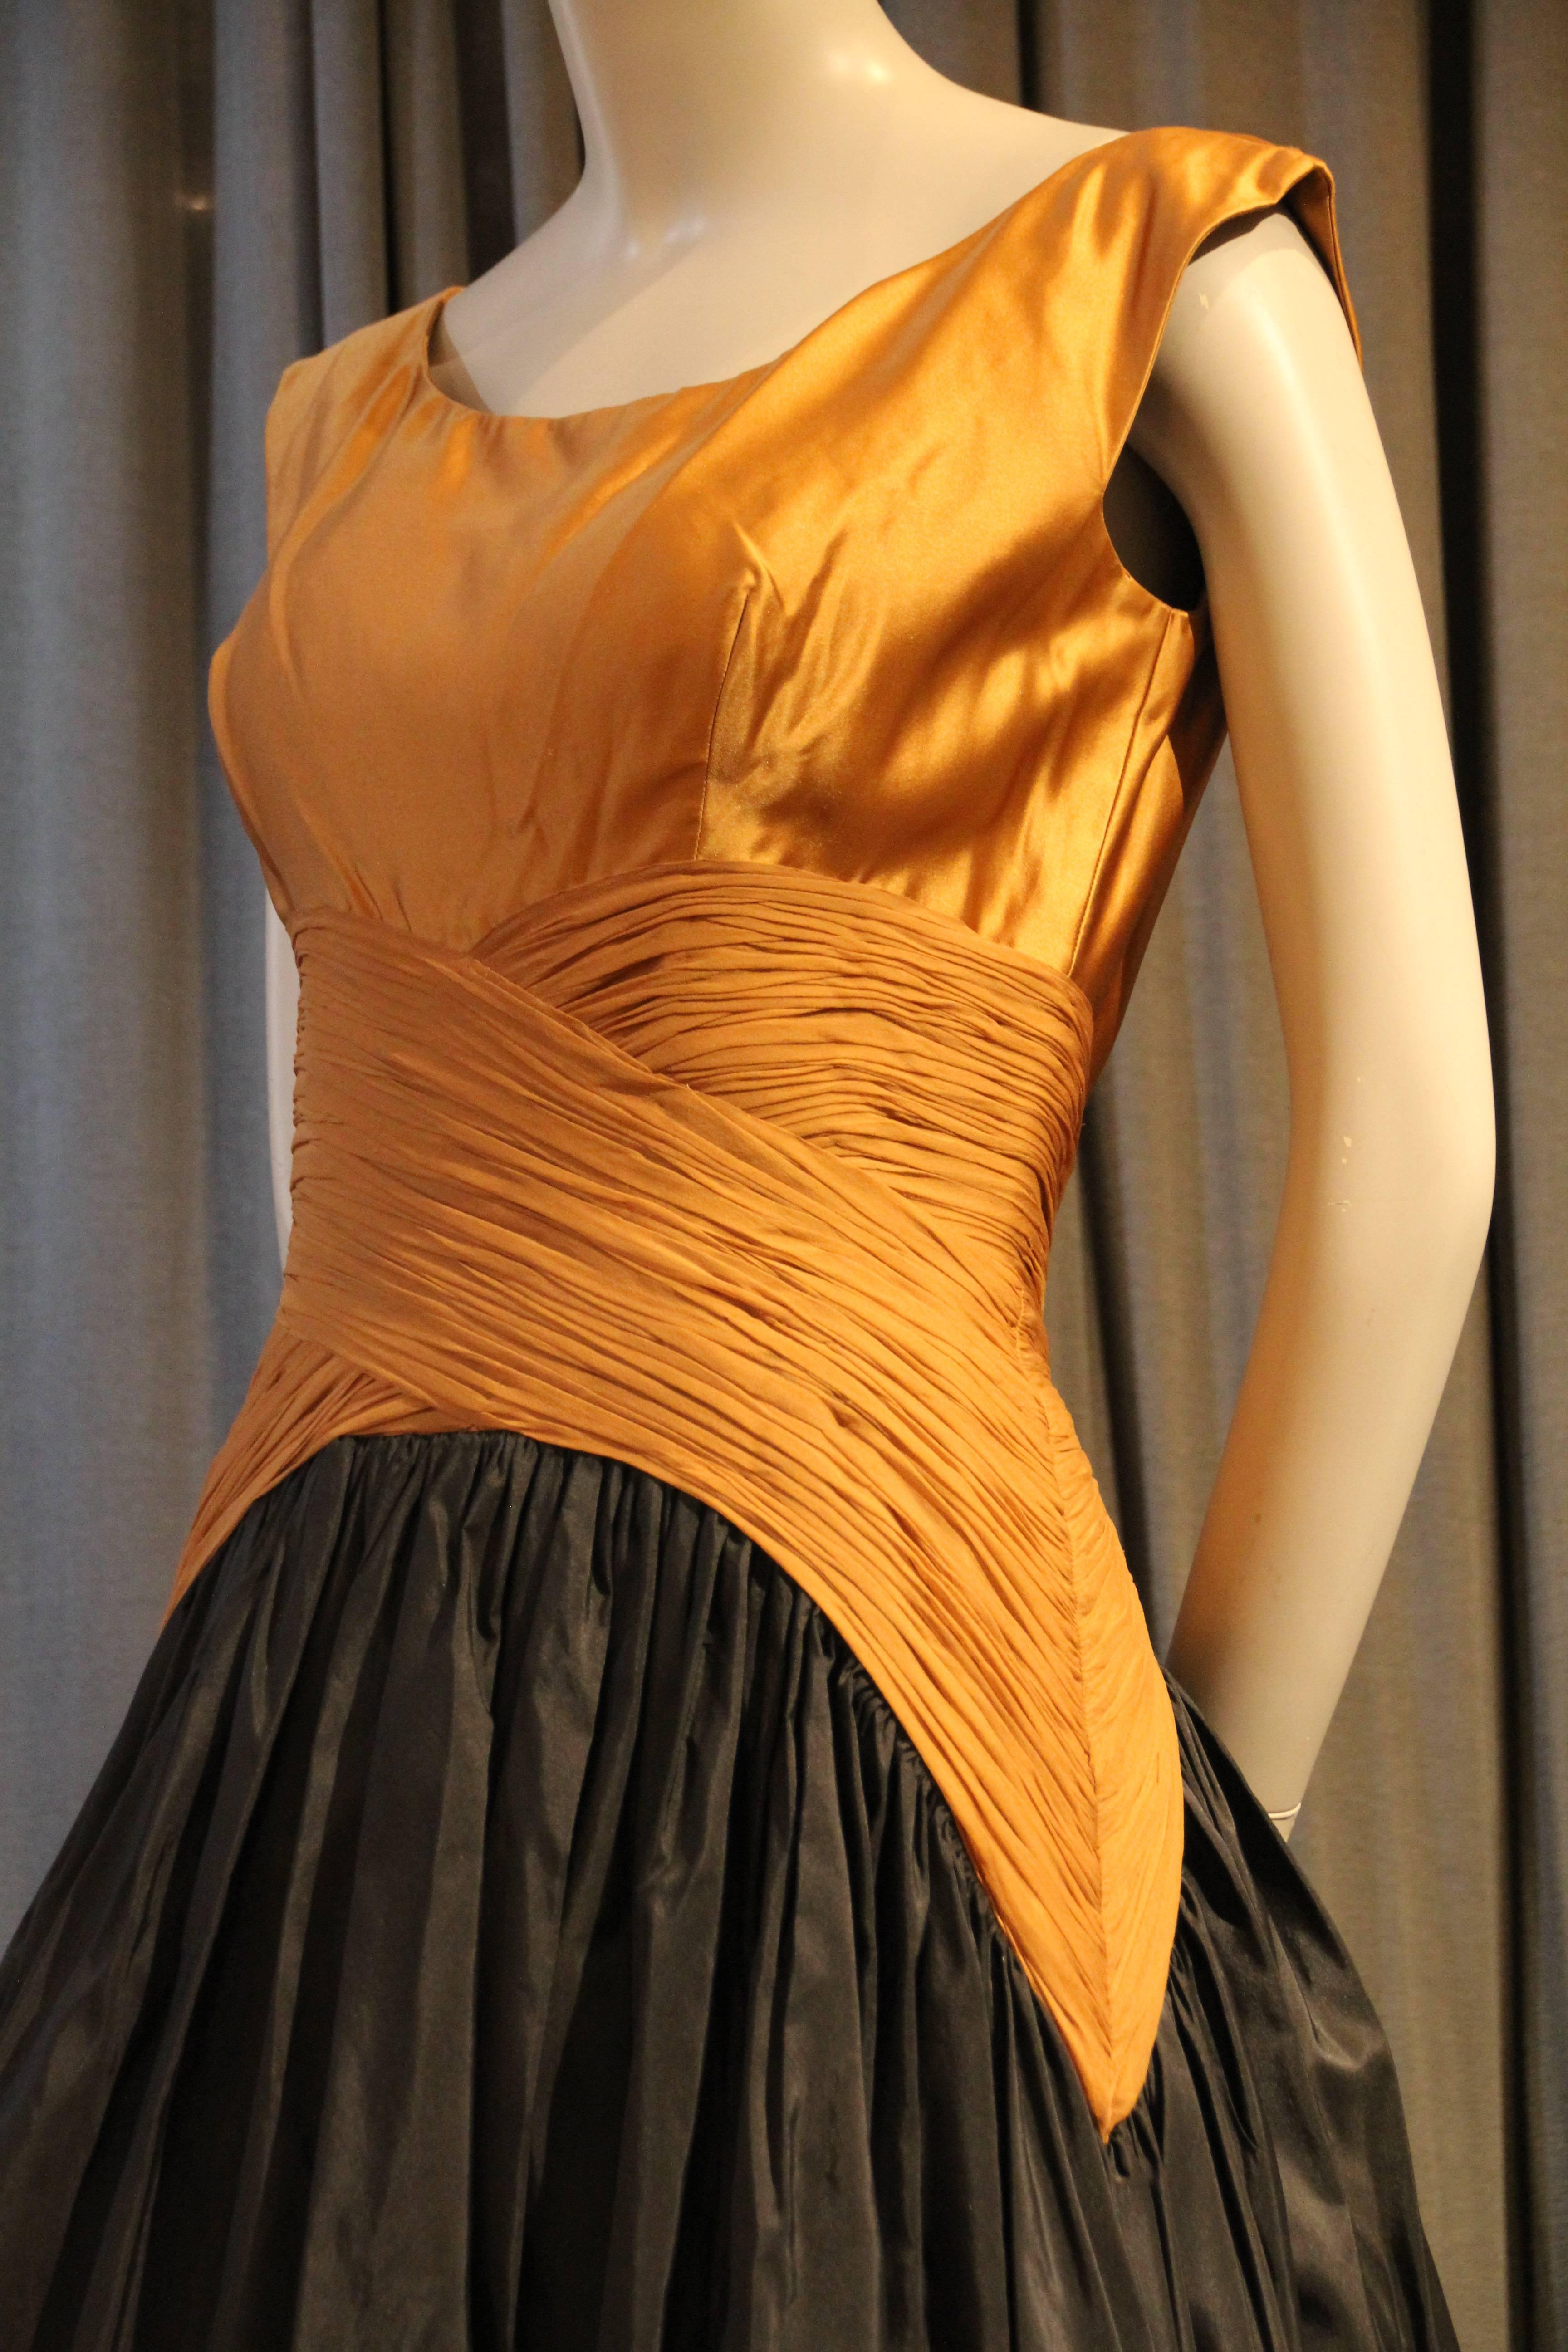 A beautiful 1950s Samuel Winston cocktail dress with full black taffeta skirt and exquisite bodice detailing in gold silk satin and ruched chiffon.Back zipper and organza and horsehair underskirt. 